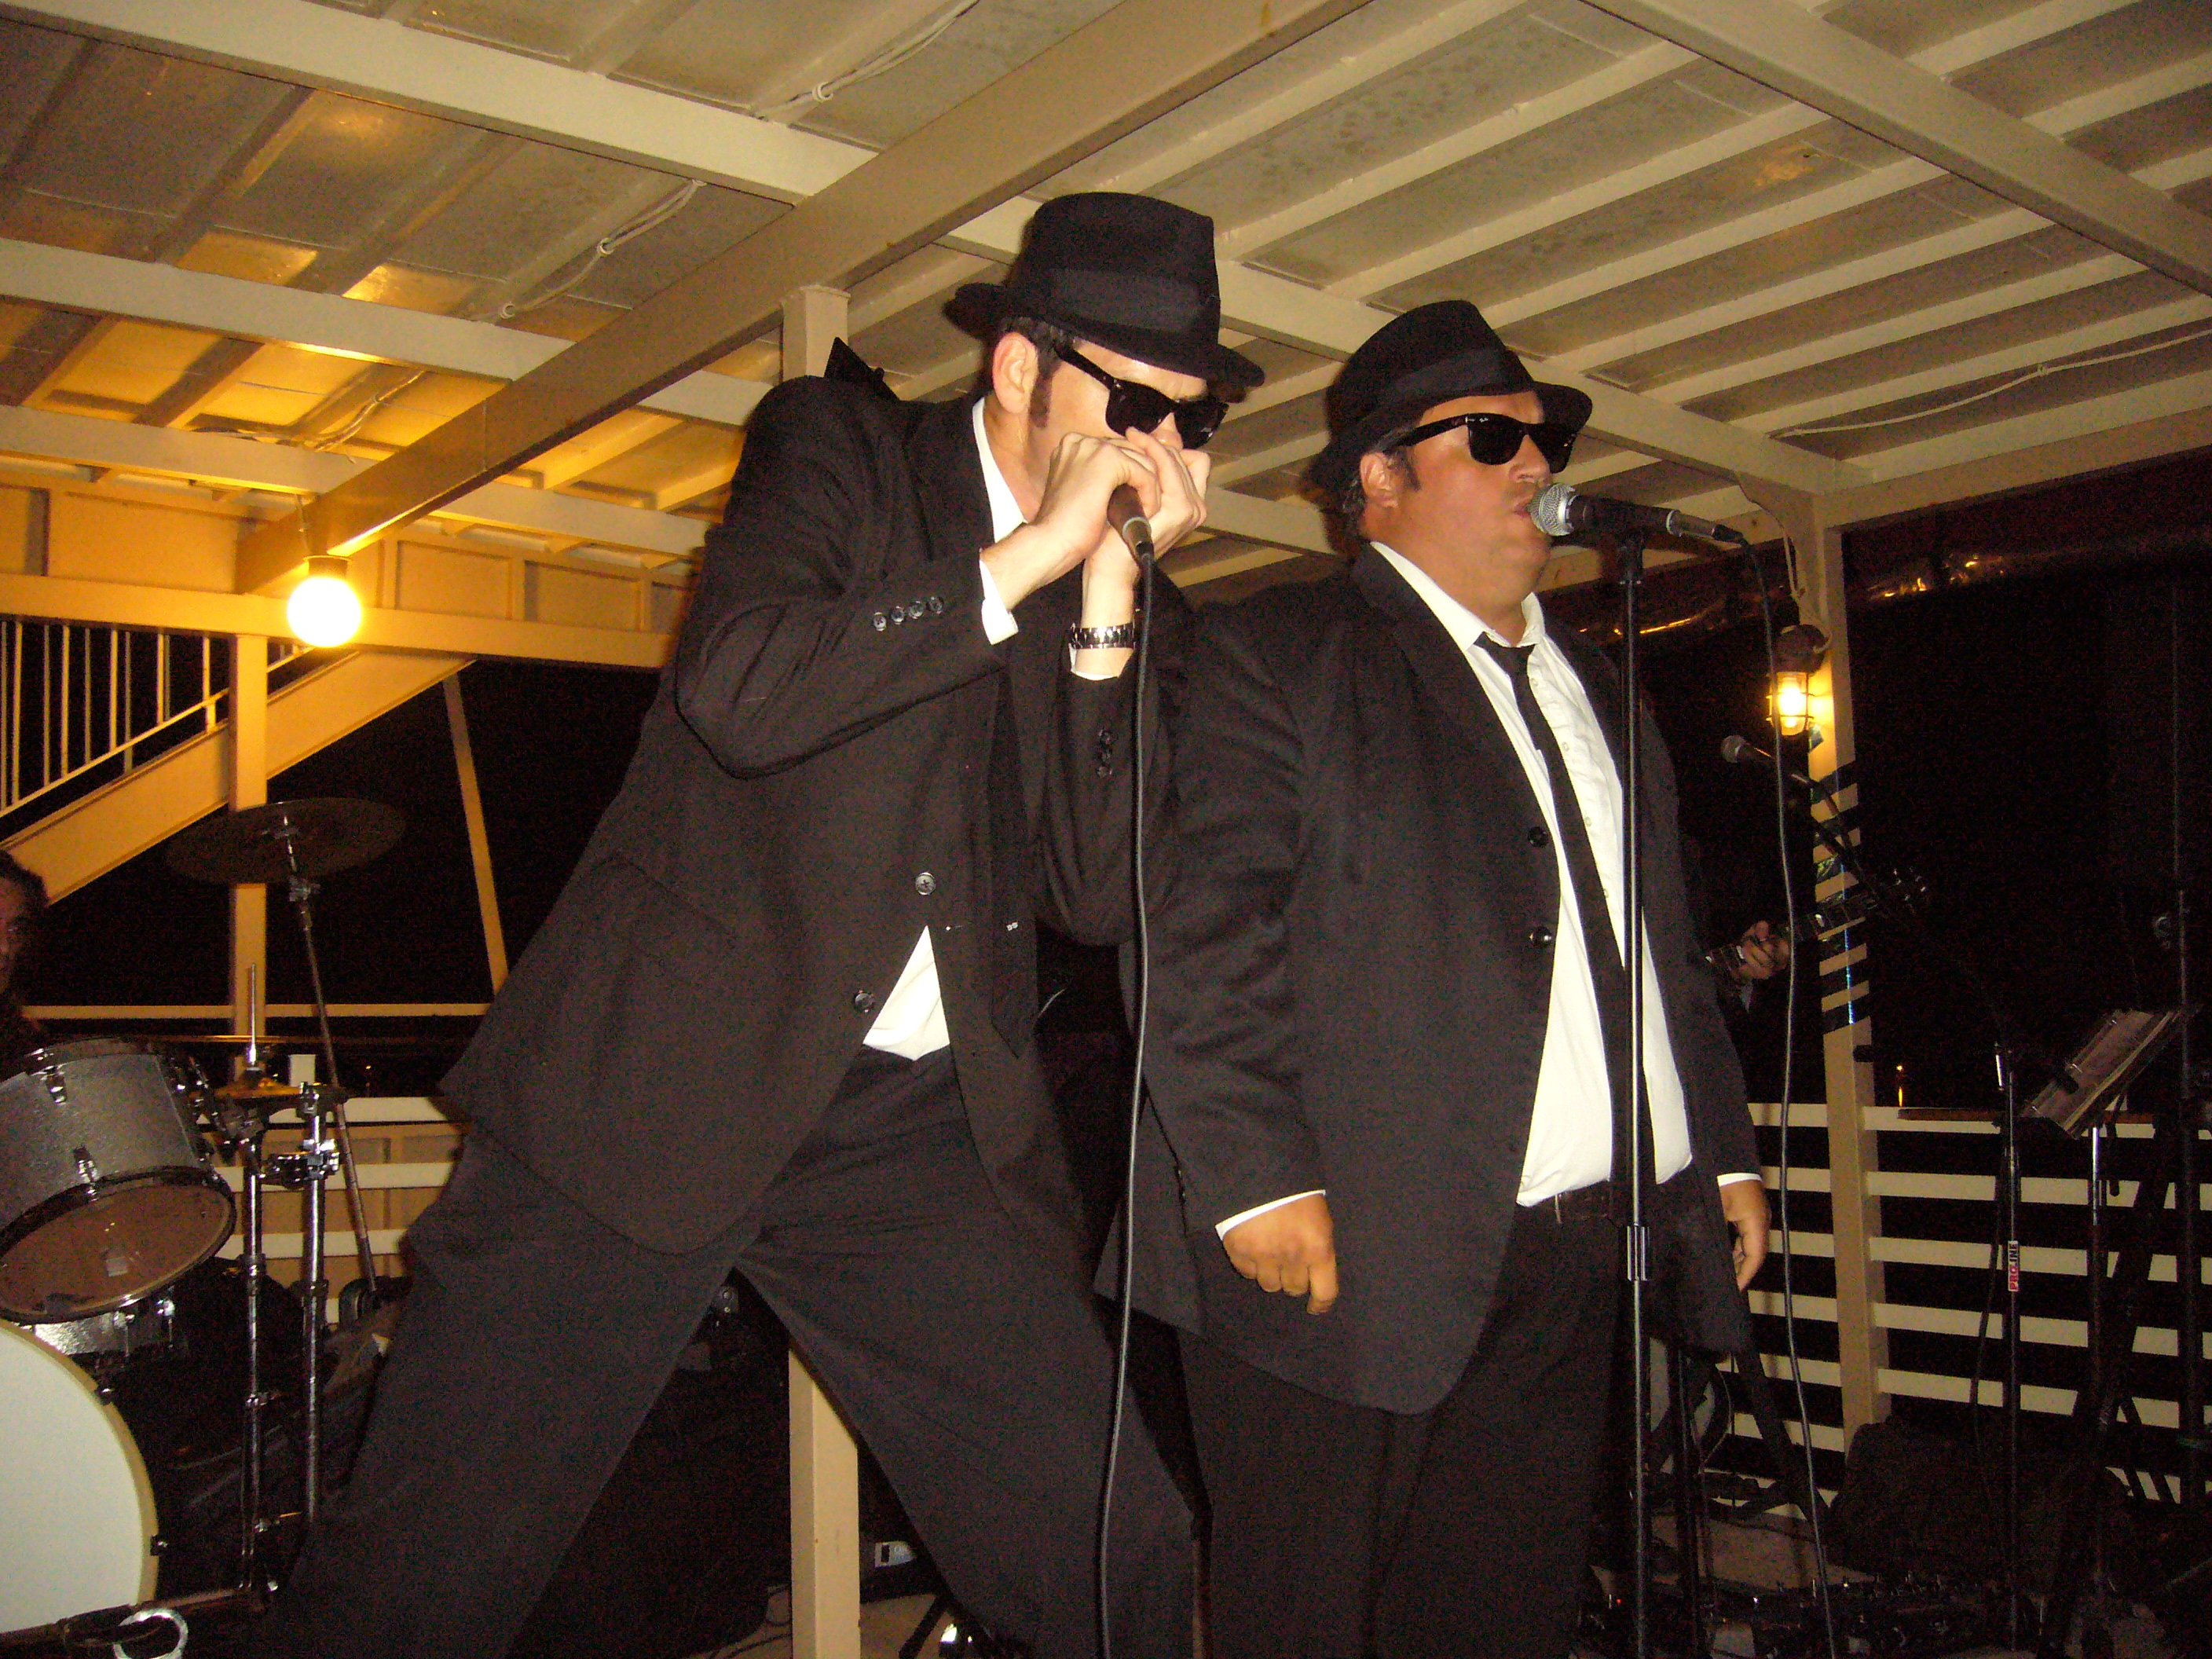 That couldn't be the Blues Brothers!